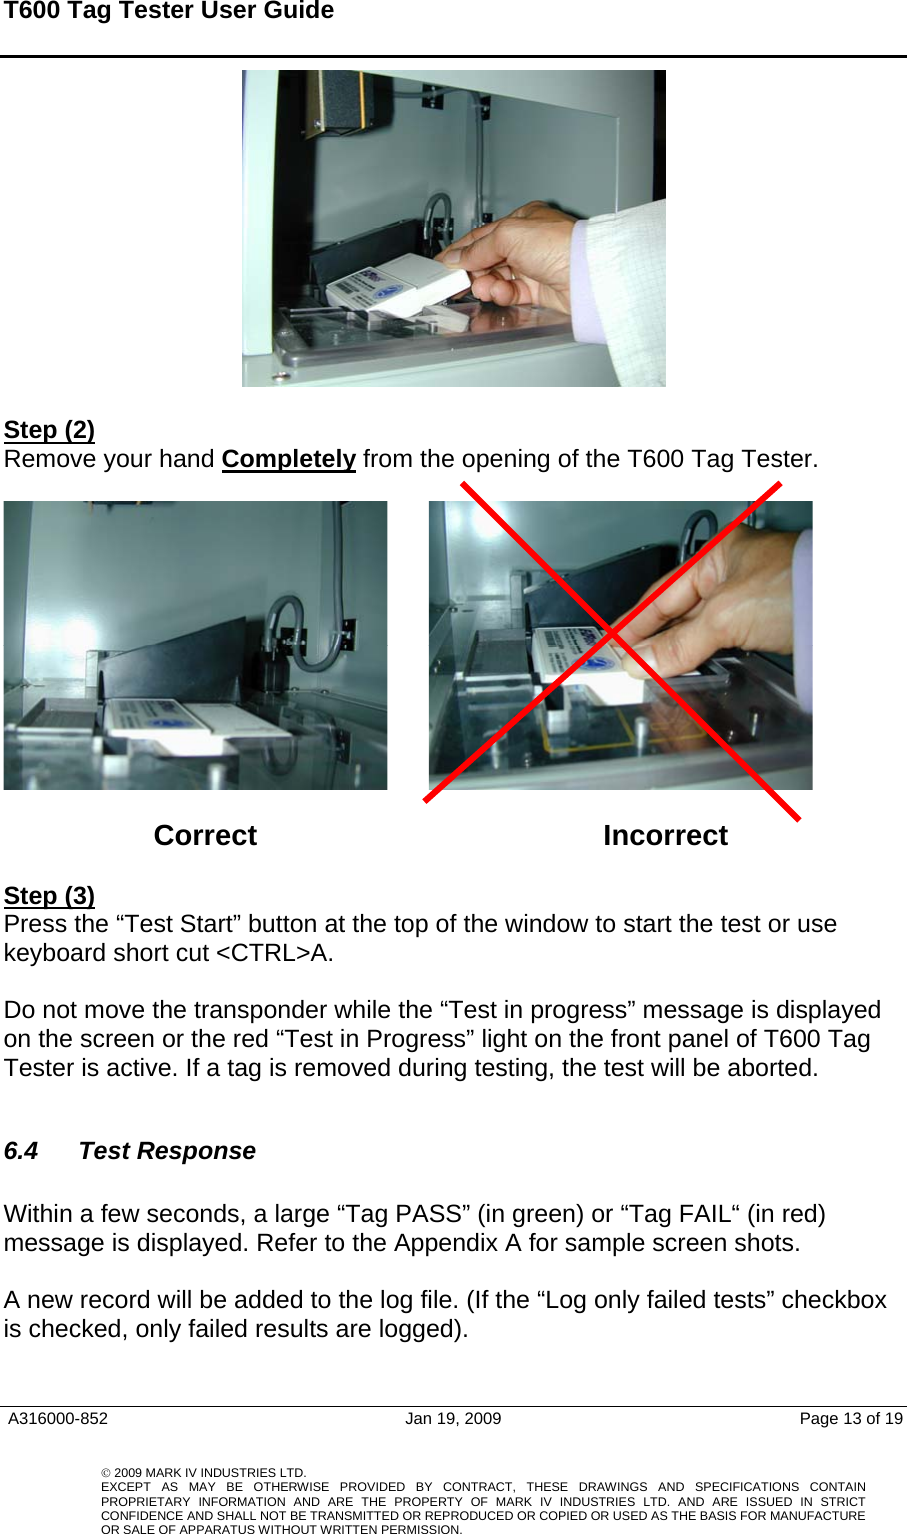 T600 Tag Tester User Guide     Step (2) Remove your hand Completely from the opening of the T600 Tag Tester.               Correct     Incorrect  Step (3) Press the “Test Start” button at the top of the window to start the test or use keyboard short cut &lt;CTRL&gt;A.    Do not move the transponder while the “Test in progress” message is displayed on the screen or the red “Test in Progress” light on the front panel of T600 Tag Tester is active. If a tag is removed during testing, the test will be aborted.  6.4  Test Response    Within a few seconds, a large “Tag PASS” (in green) or “Tag FAIL“ (in red) message is displayed. Refer to the Appendix A for sample screen shots.     A new record will be added to the log file. (If the “Log only failed tests” checkbox is checked, only failed results are logged).     A316000-852  Jan 19, 2009  Page 13 of 19    © 2009 MARK IV INDUSTRIES LTD. EXCEPT AS MAY BE OTHERWISE PROVIDED BY CONTRACT, THESE DRAWINGS AND SPECIFICATIONS CONTAINPROPRIETARY INFORMATION AND ARE THE PROPERTY OF MARK IV INDUSTRIES LTD. AND ARE ISSUED IN STRICT CONFIDENCE AND SHALL NOT BE TRANSMITTED OR REPRODUCED OR COPIED OR USED AS THE BASIS FOR MANUFACTUREOR SALE OF APPARATUS WITHOUT WRITTEN PERMISSION.